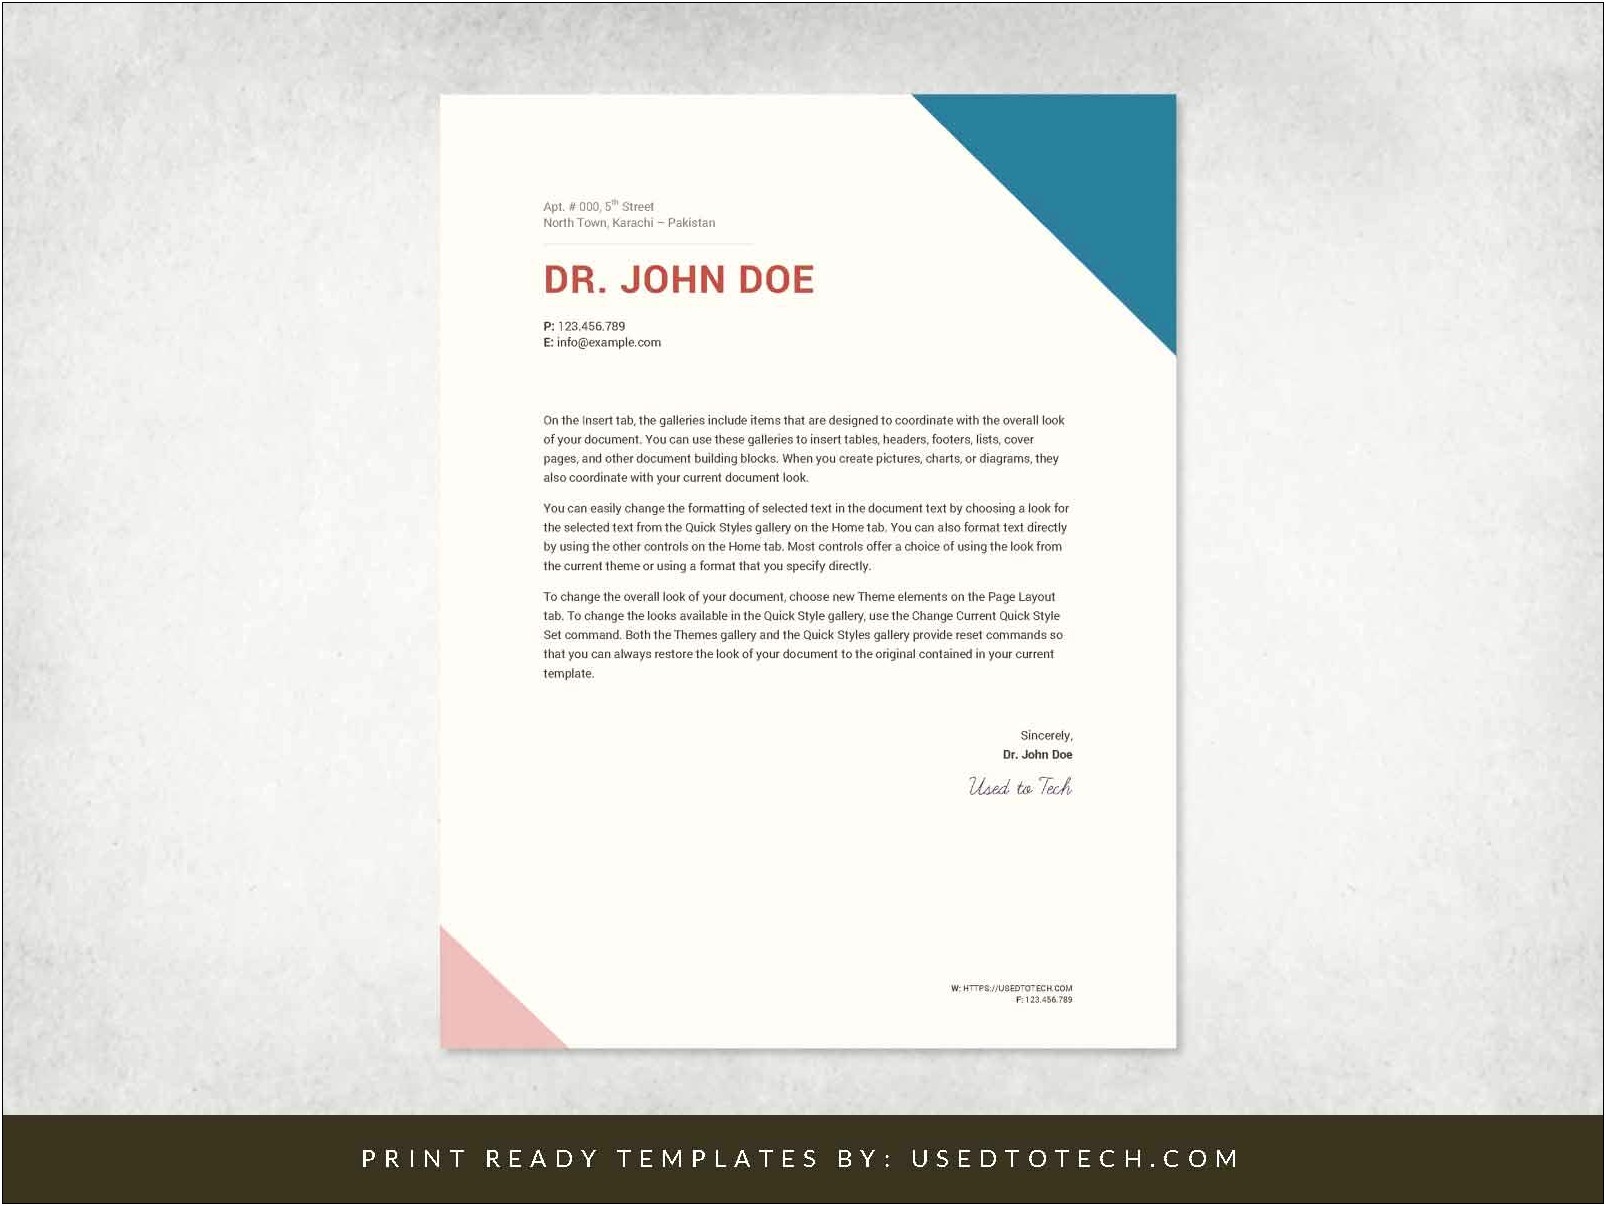 Free Personal Letterhead Templates Word With Logo